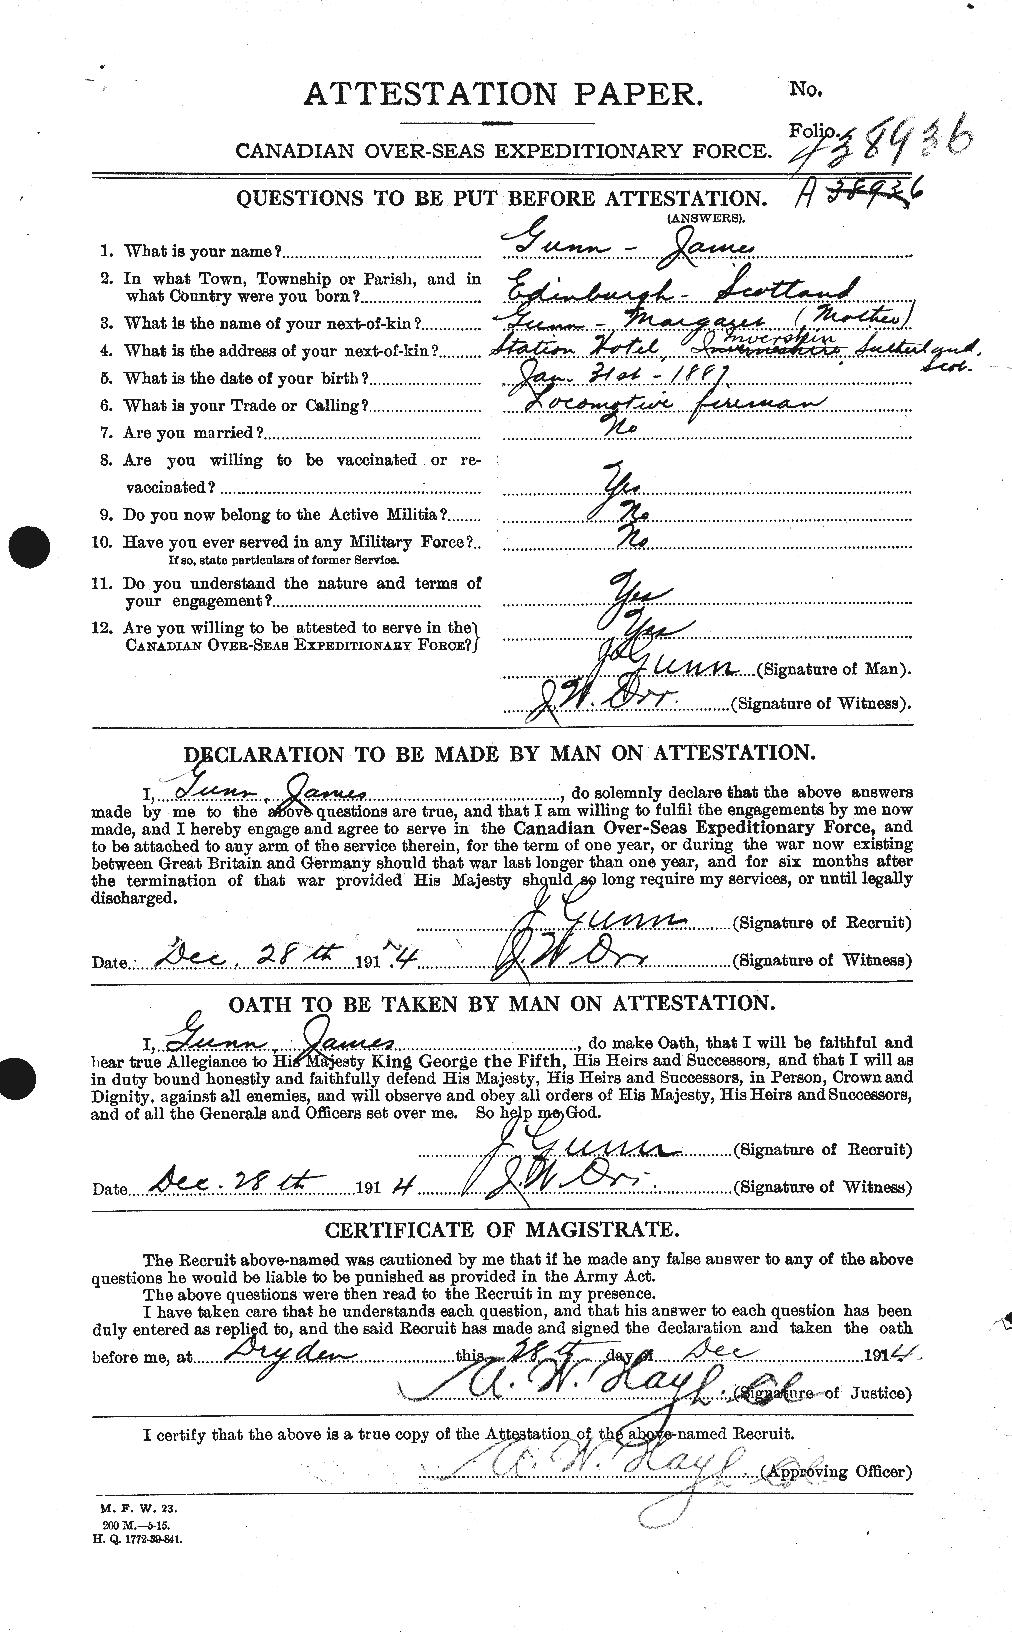 Personnel Records of the First World War - CEF 369267a